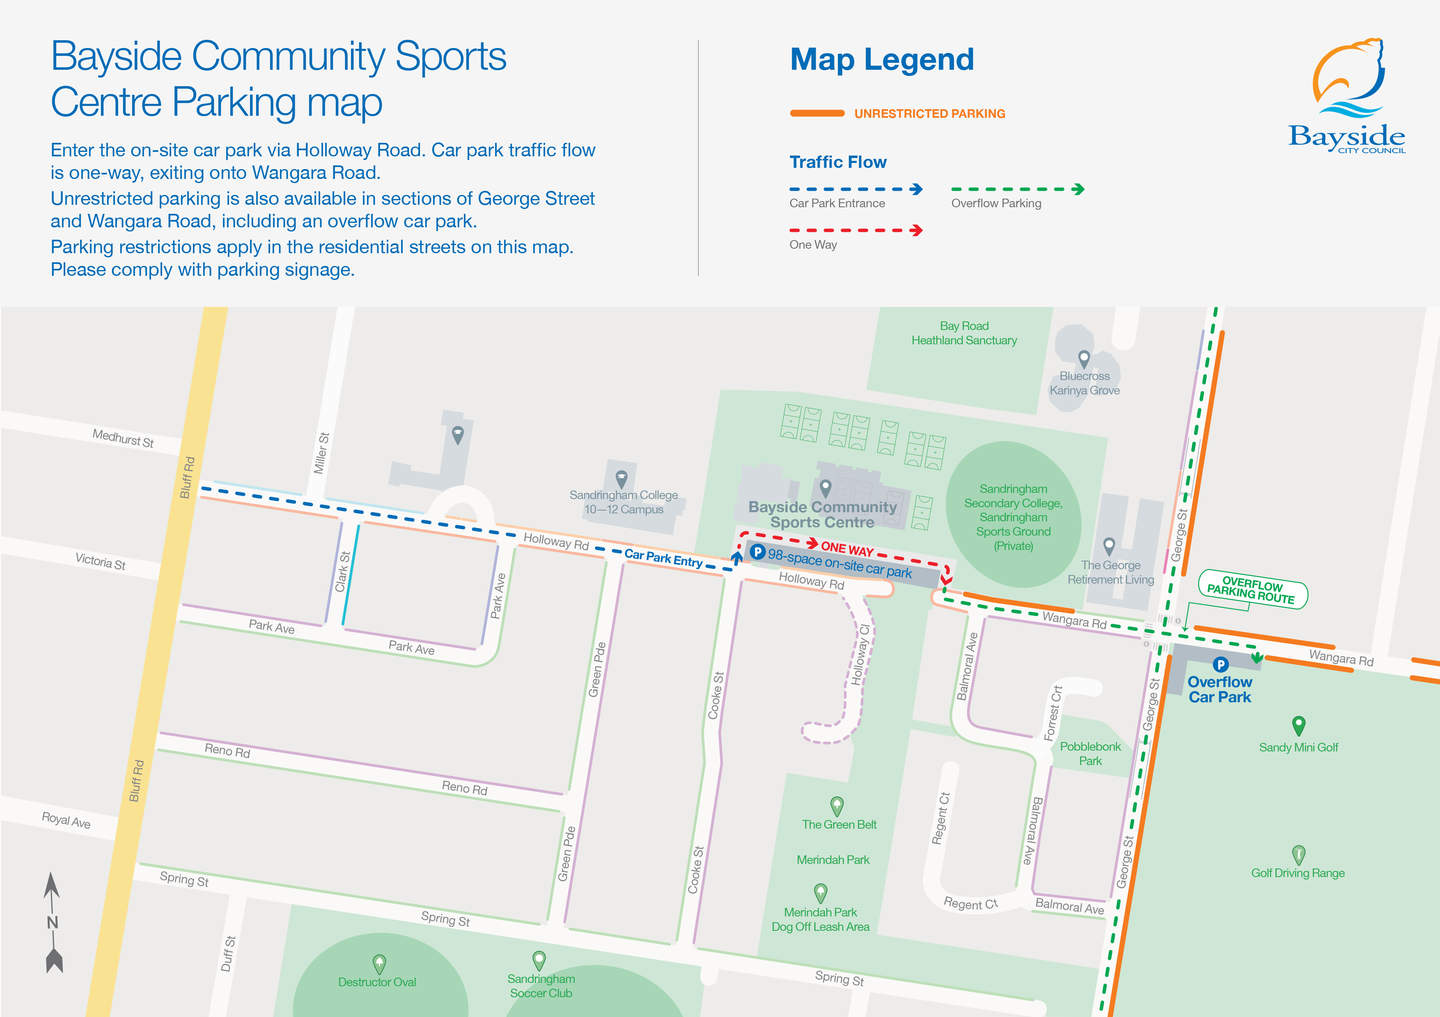 Bayside Community Sports Centre traffic flow and parking map